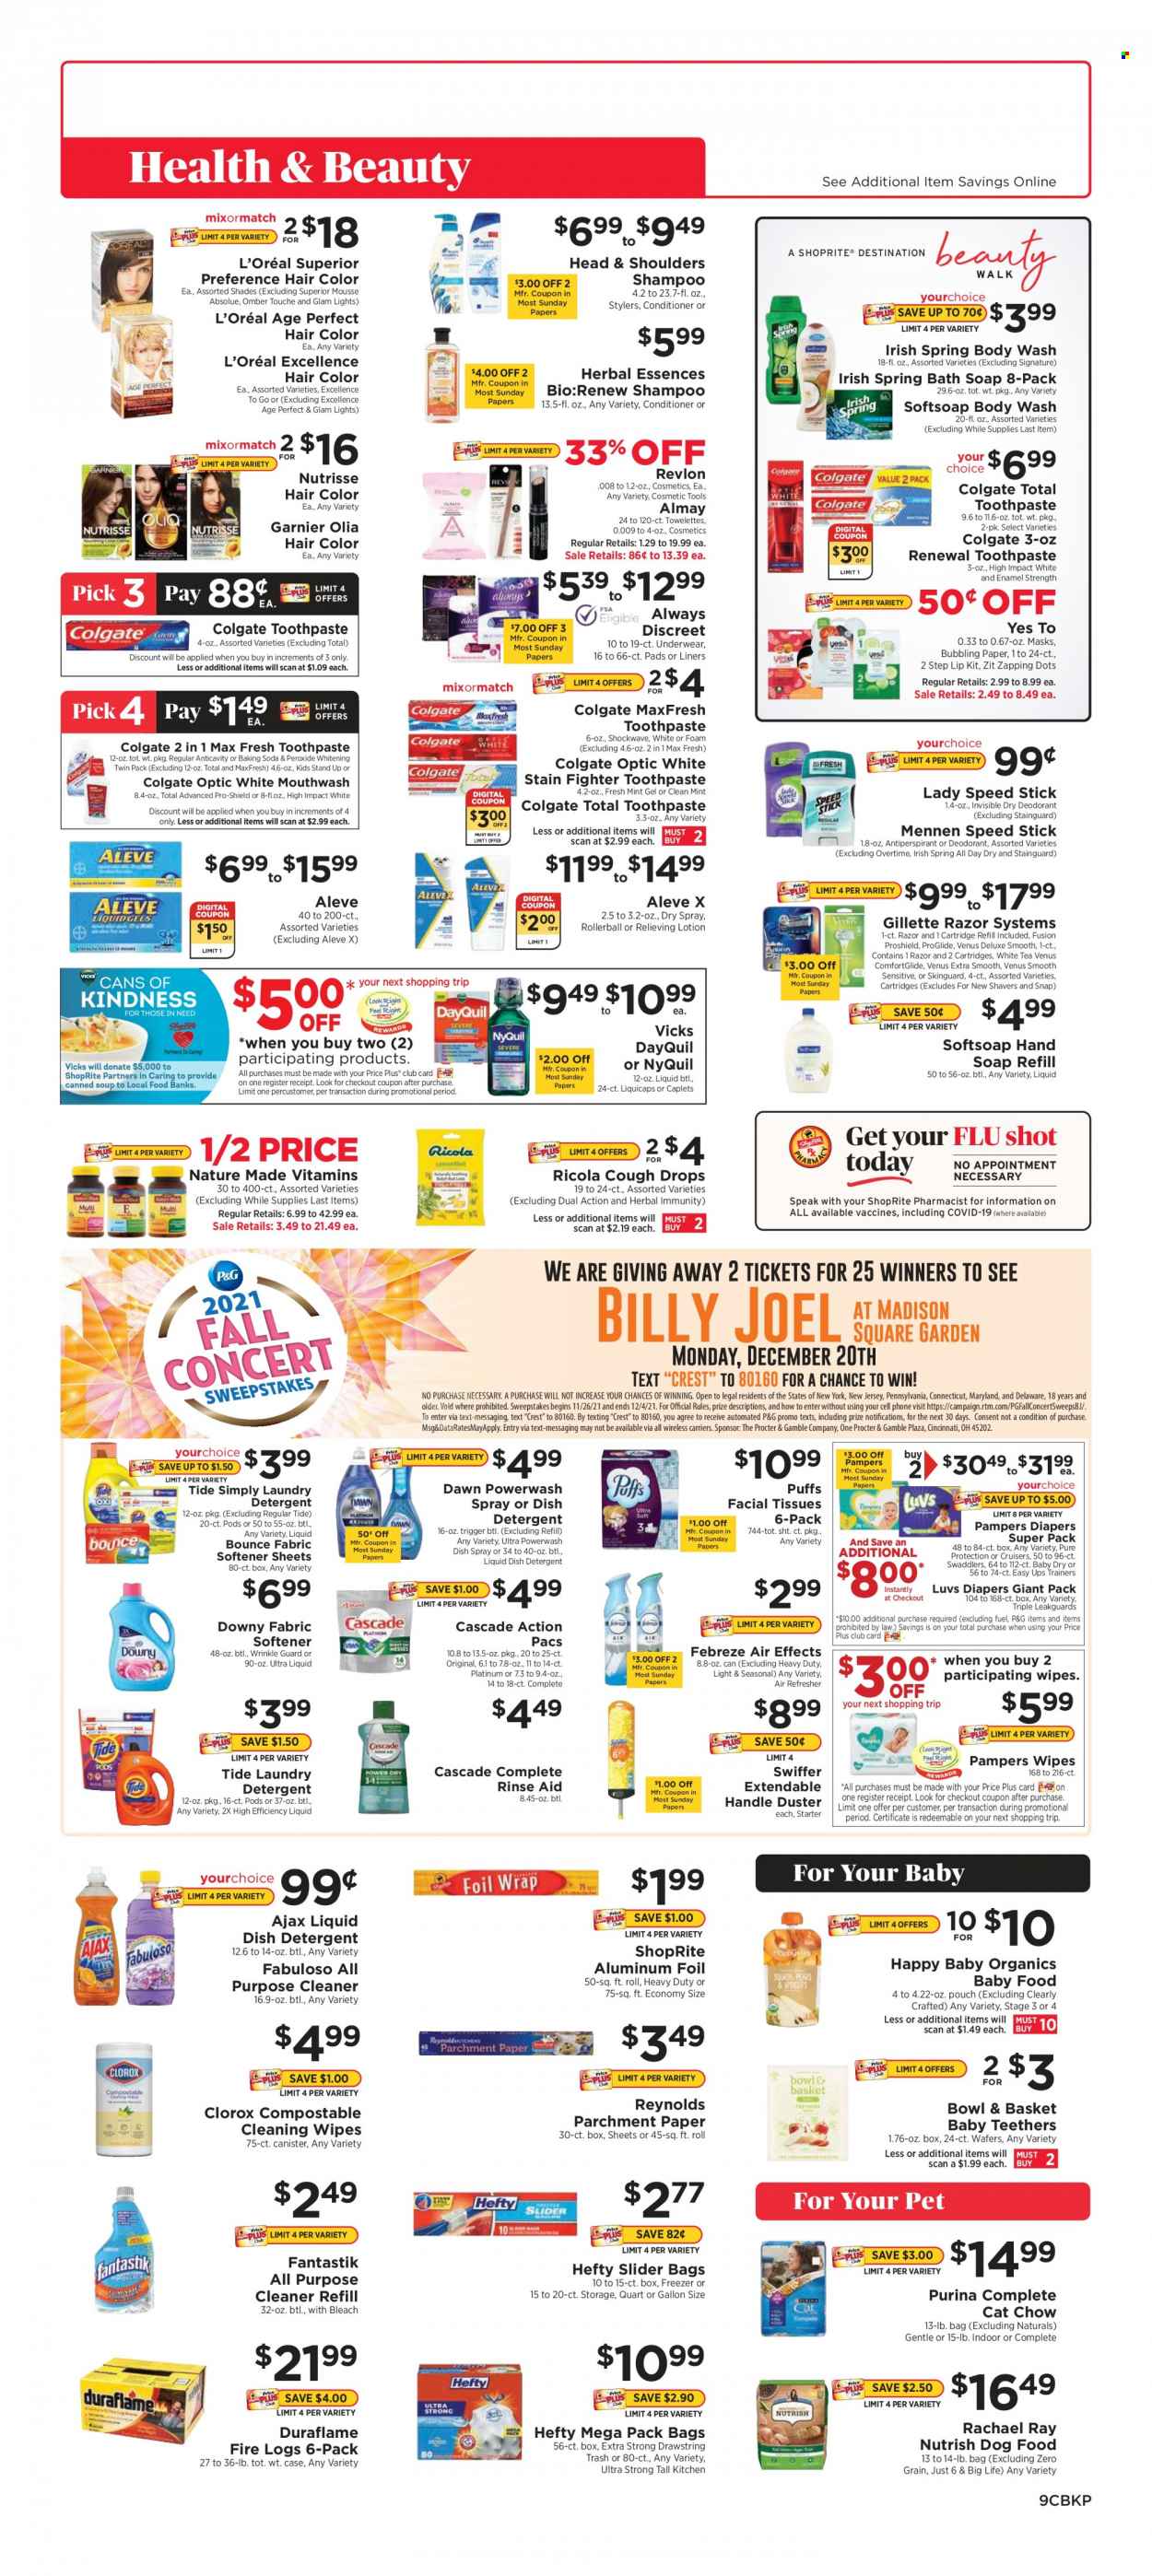 thumbnail - ShopRite Flyer - 11/28/2021 - 12/04/2021 - Sales products - Bowl & Basket, ricola, wafers, cleansing wipes, wipes, Pampers, nappies, tissues, cosmetic tools, detergent, Febreze, cleaner, bleach, all purpose cleaner, Clorox, Ajax, Fabuloso, Cascade, Tide, fabric softener, laundry detergent, Bounce, Downy Laundry, body wash, shampoo, Softsoap, hand soap, soap, Colgate, toothpaste, mouthwash, Crest, sanitary pads, Always Discreet, Almay, facial tissues, Garnier, L’Oréal, conditioner, refresher, Revlon, Head & Shoulders, hair color, Herbal Essences, body lotion, anti-perspirant, Speed Stick, deodorant, Gillette, razor, Venus, Hefty, duster, canister, aluminium foil, paper, animal food, dog food, Purina, Nutrish, Aleve, DayQuil, Nature Made, NyQuil, Vicks, cough drops. Page 9.